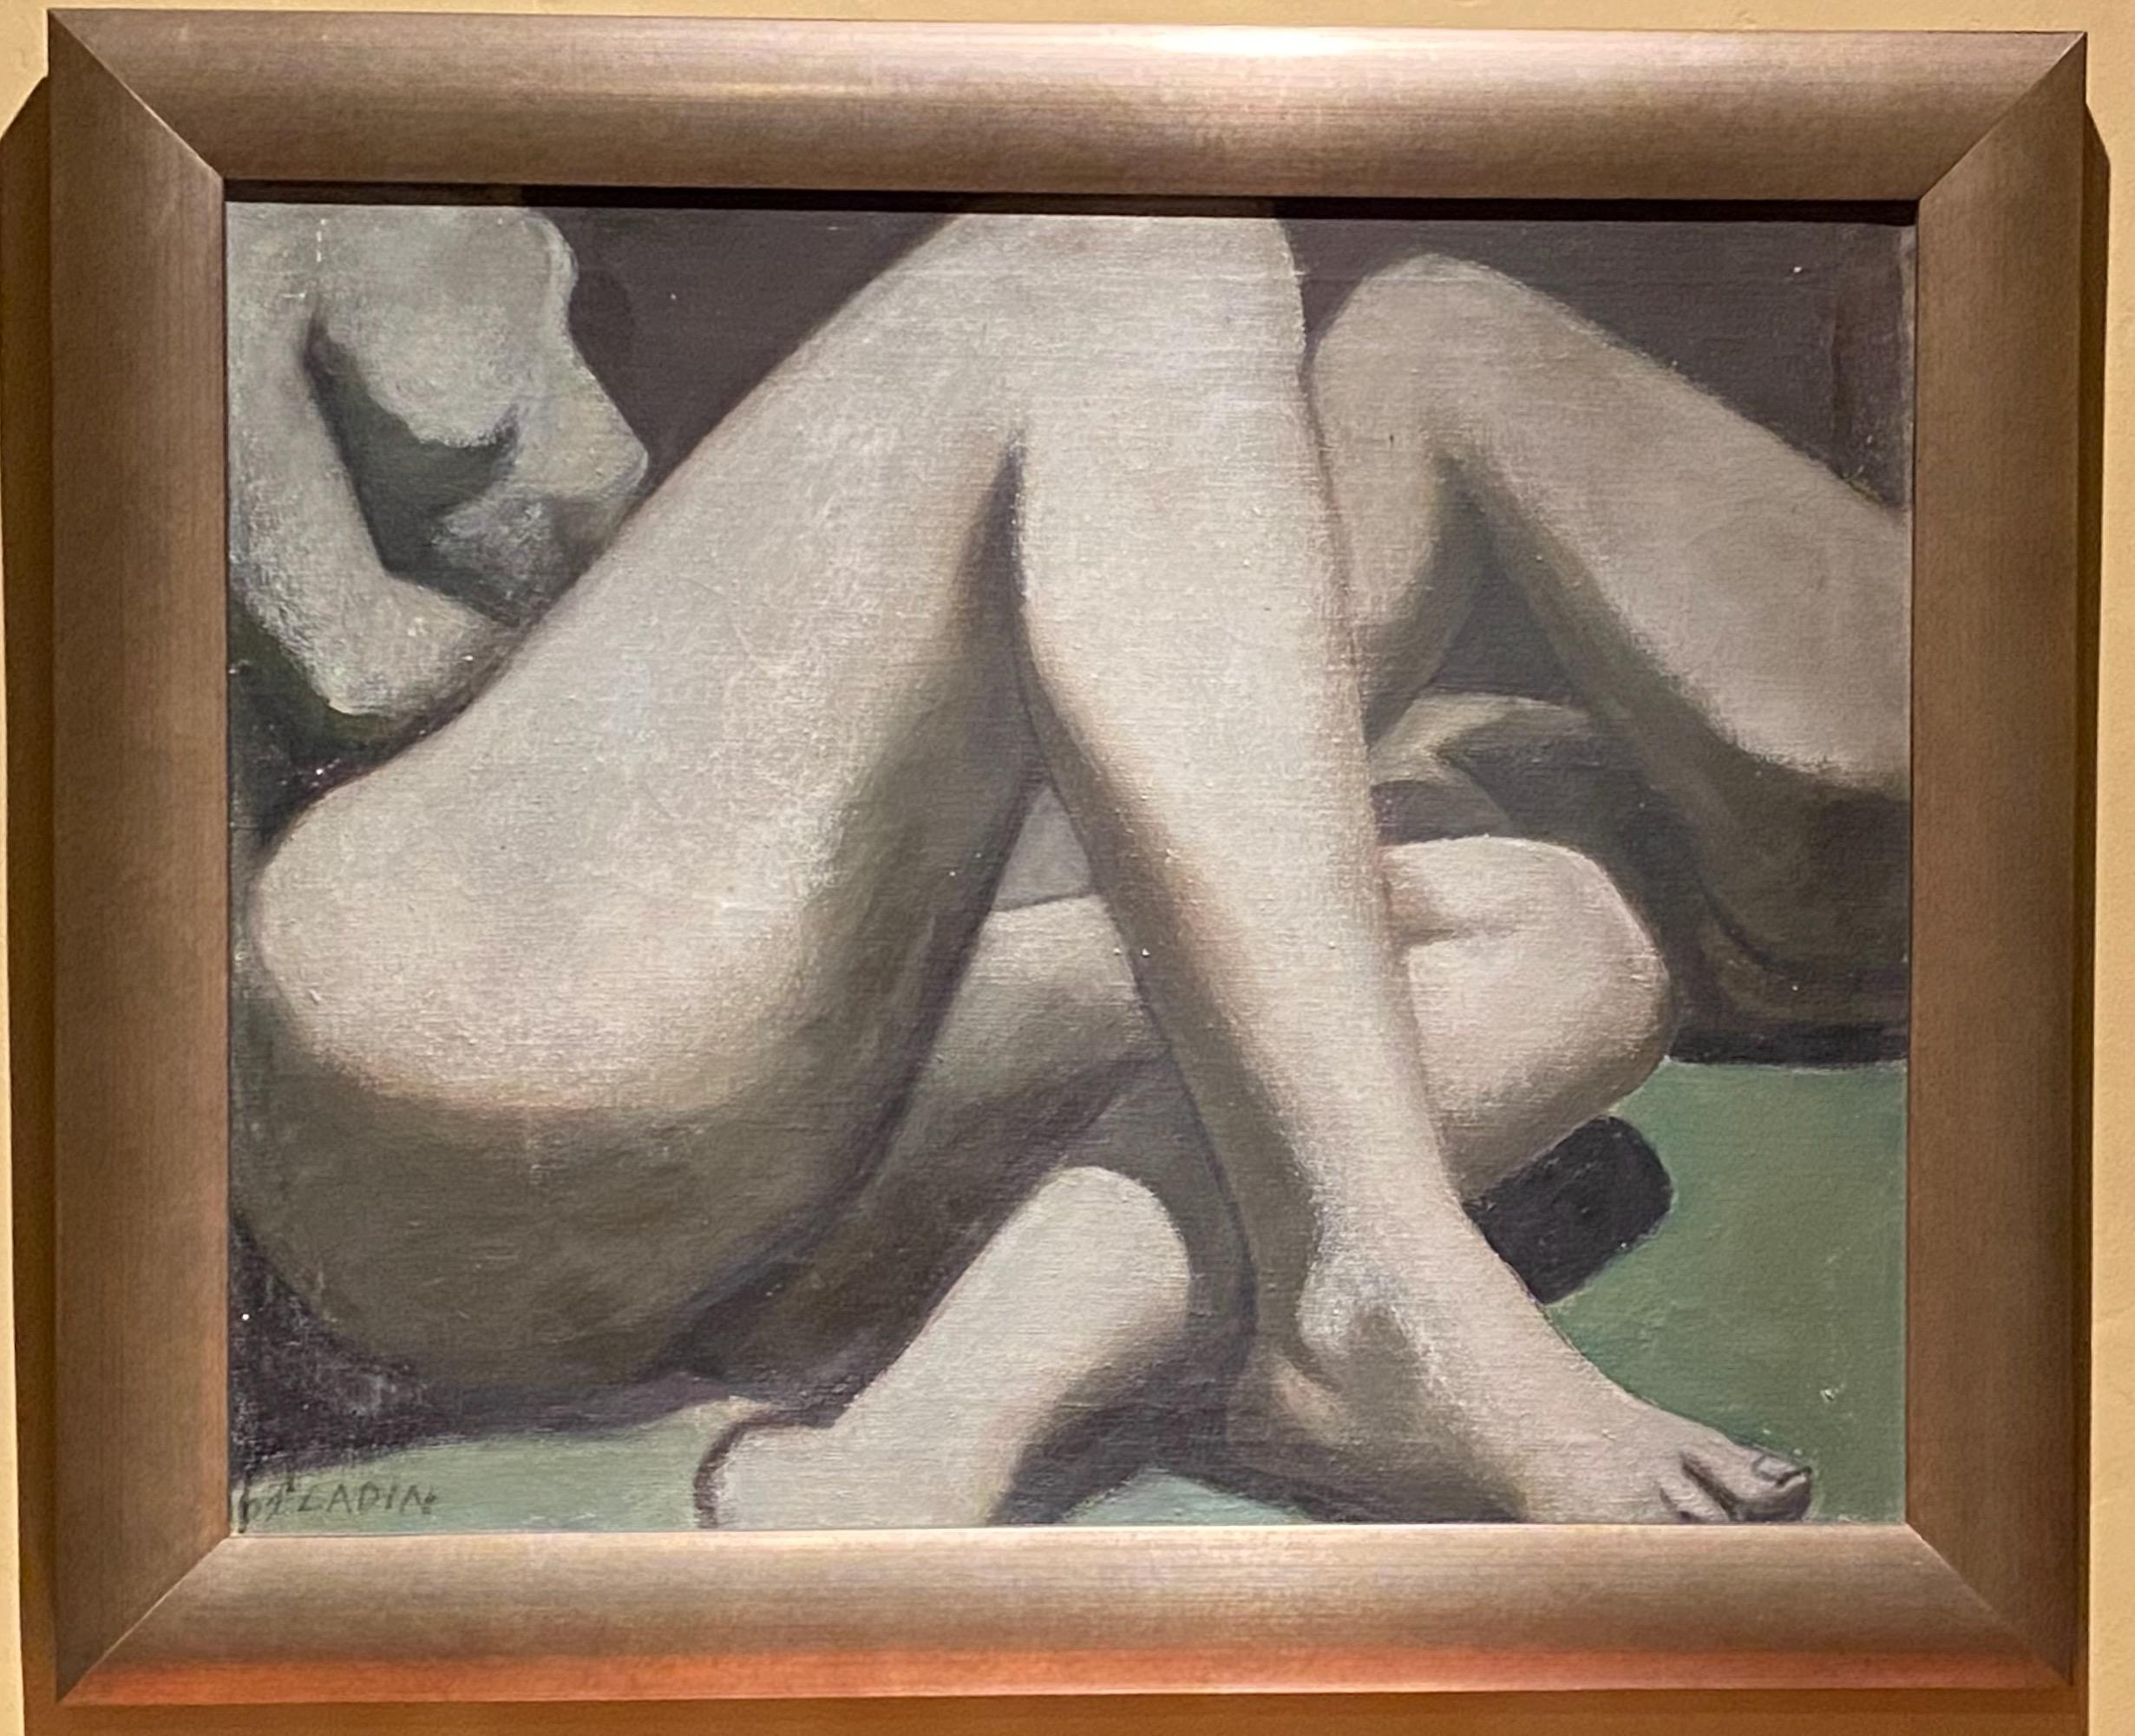 Large impressive painting of nude figures. Oil on canvas, recently framed, signed Ladin (California Bay Area artist).
American, mid-20th century.
Measurement of the painting without the frame 29.5 inches x 23.25 inches.
 